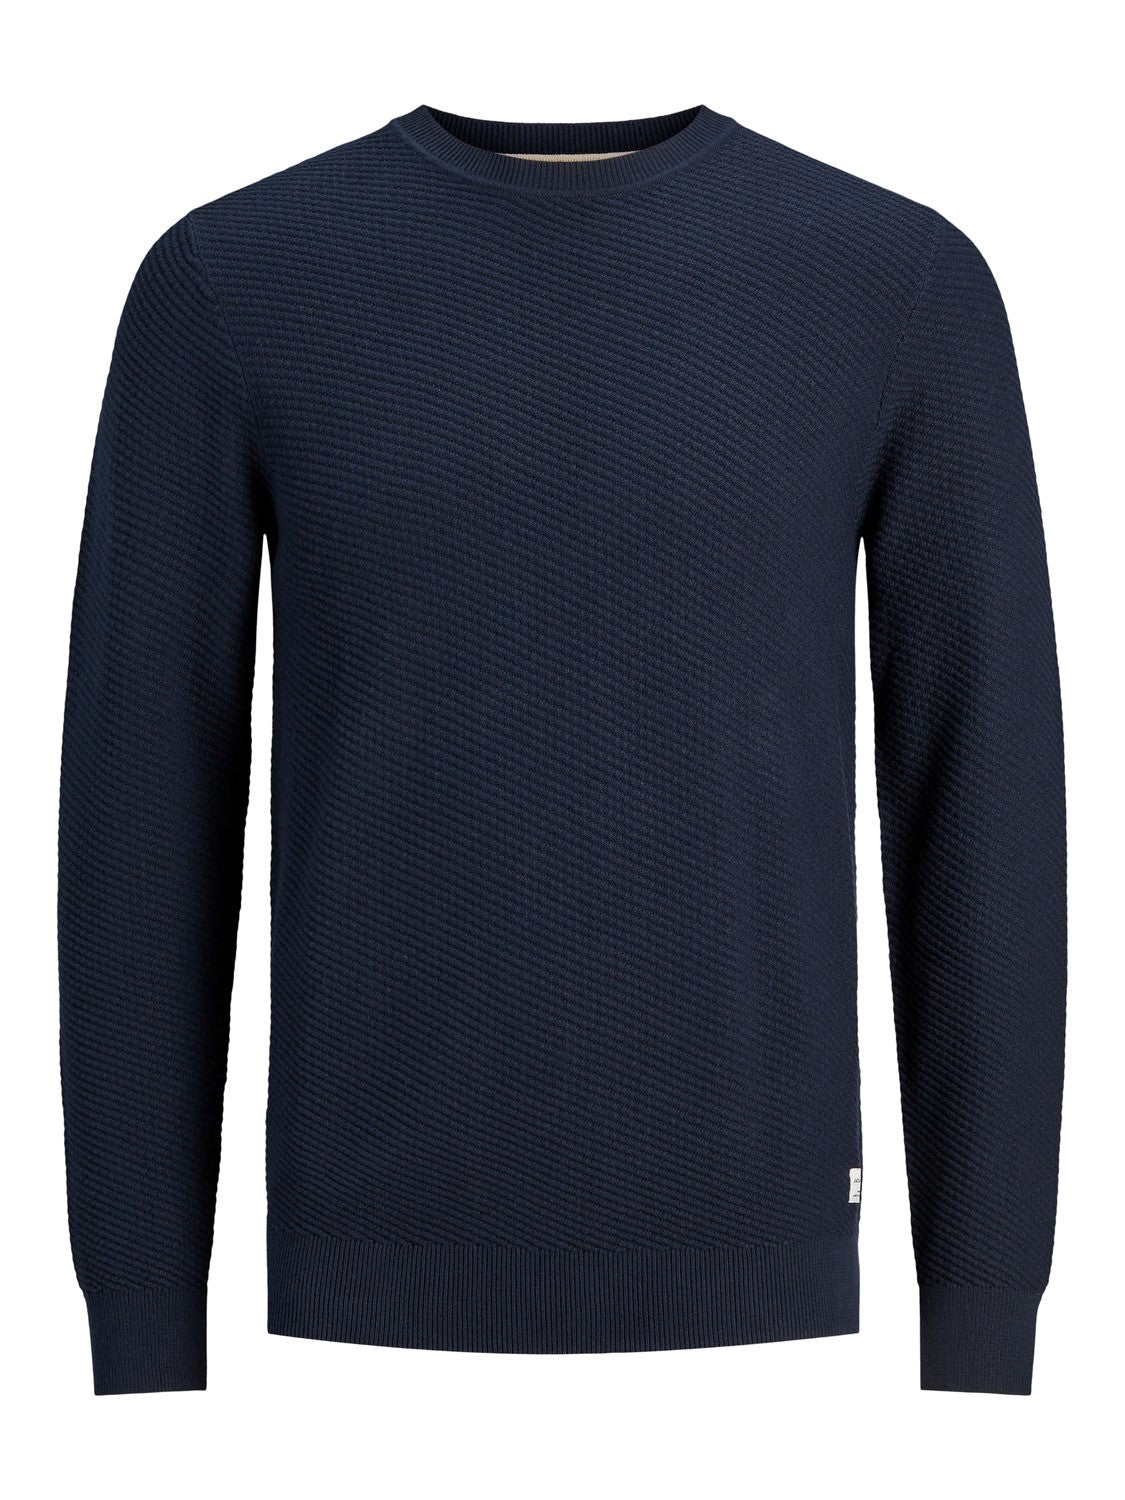 Marlow Knit Structure Sweater - Spirit Clothing